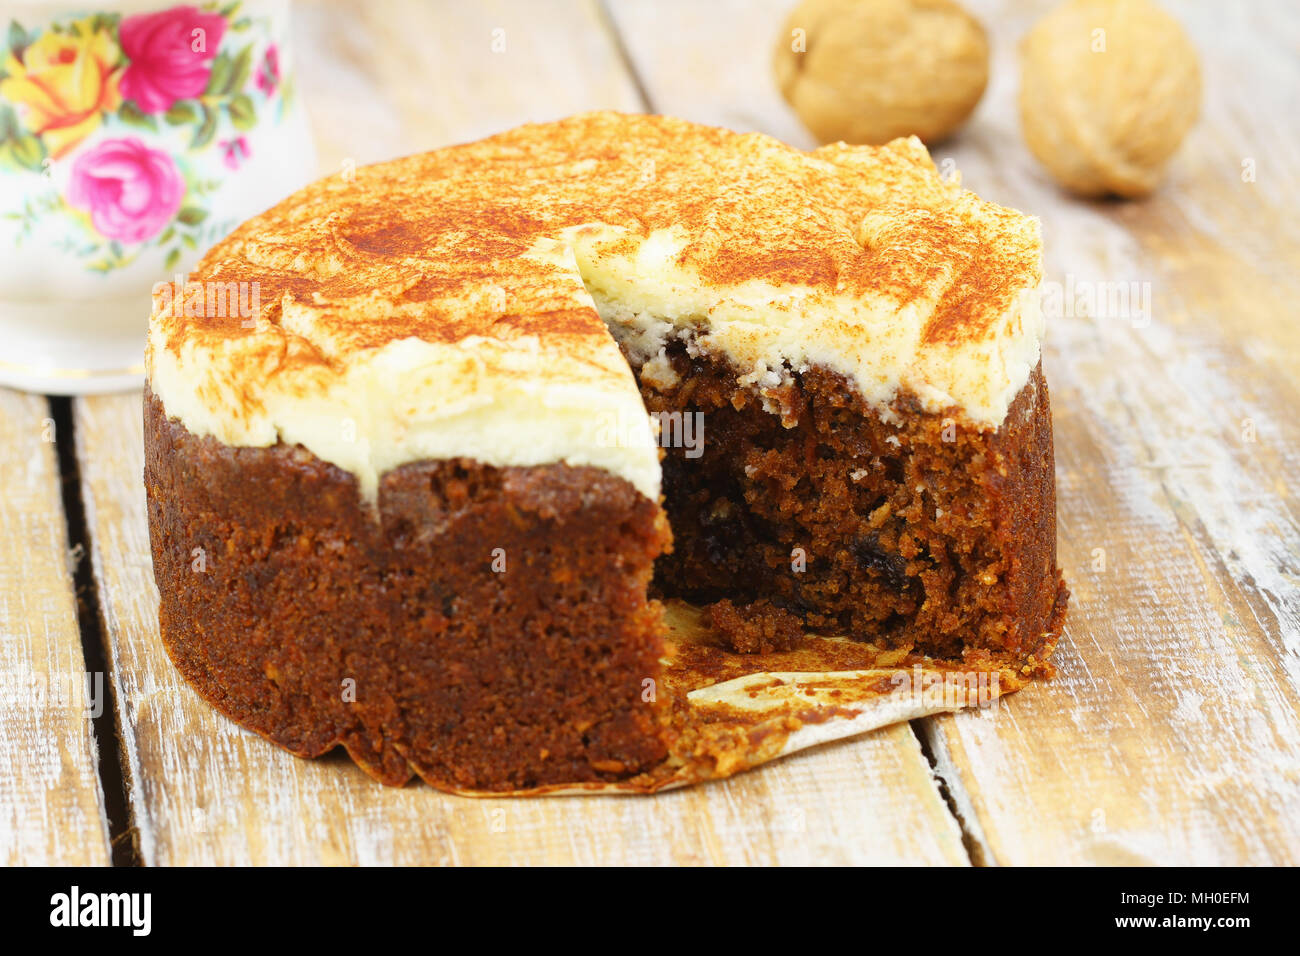 Whole carrot and walnut cake with marzipan icing Stock Photo